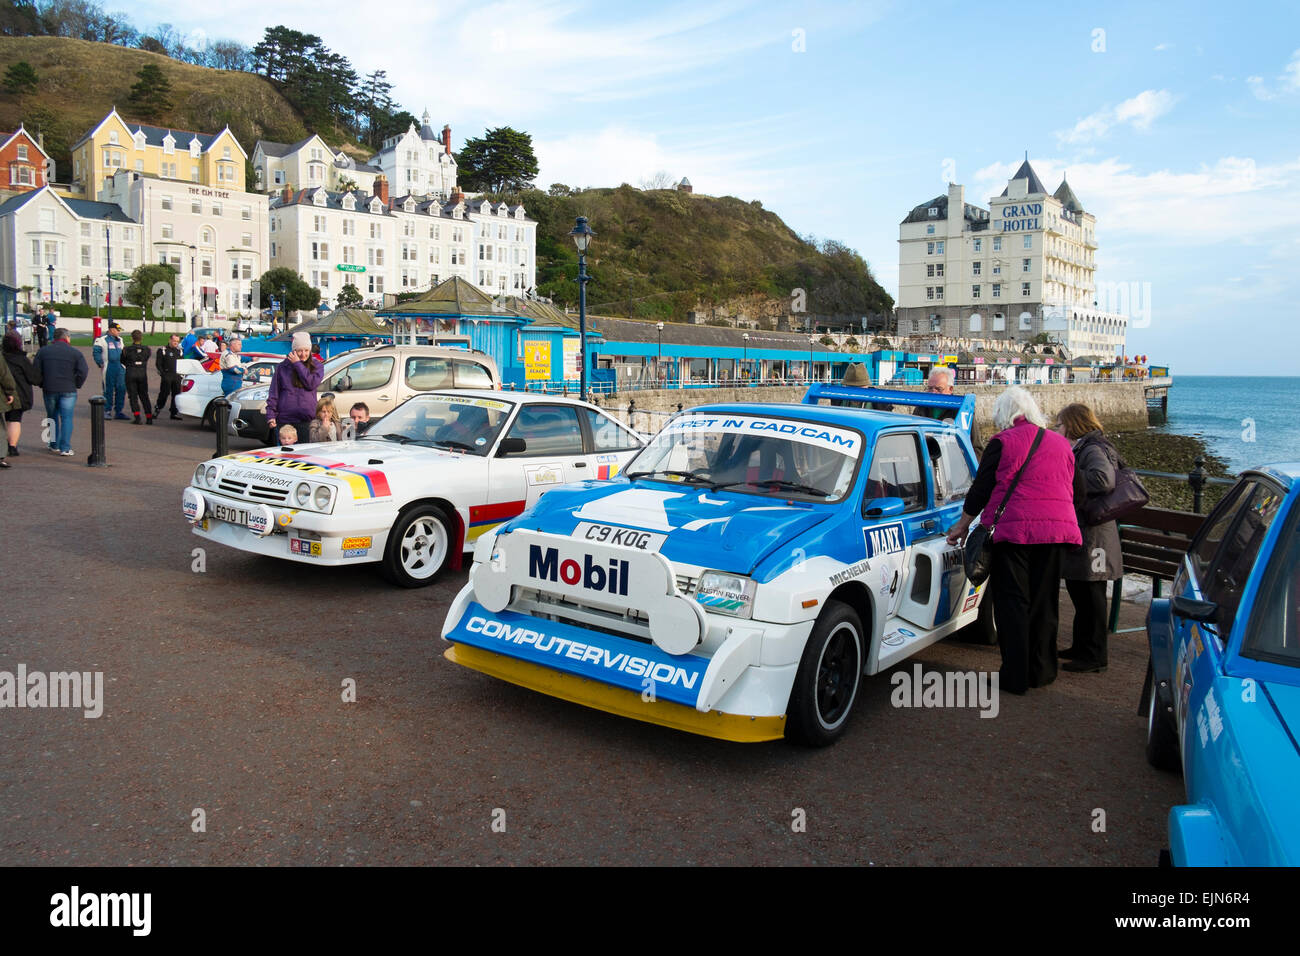 Metro 6R4 and Opel Manta rally cars on the seafront at Llandudno, Wales, at the start of the Cambrian Rally. Stock Photo